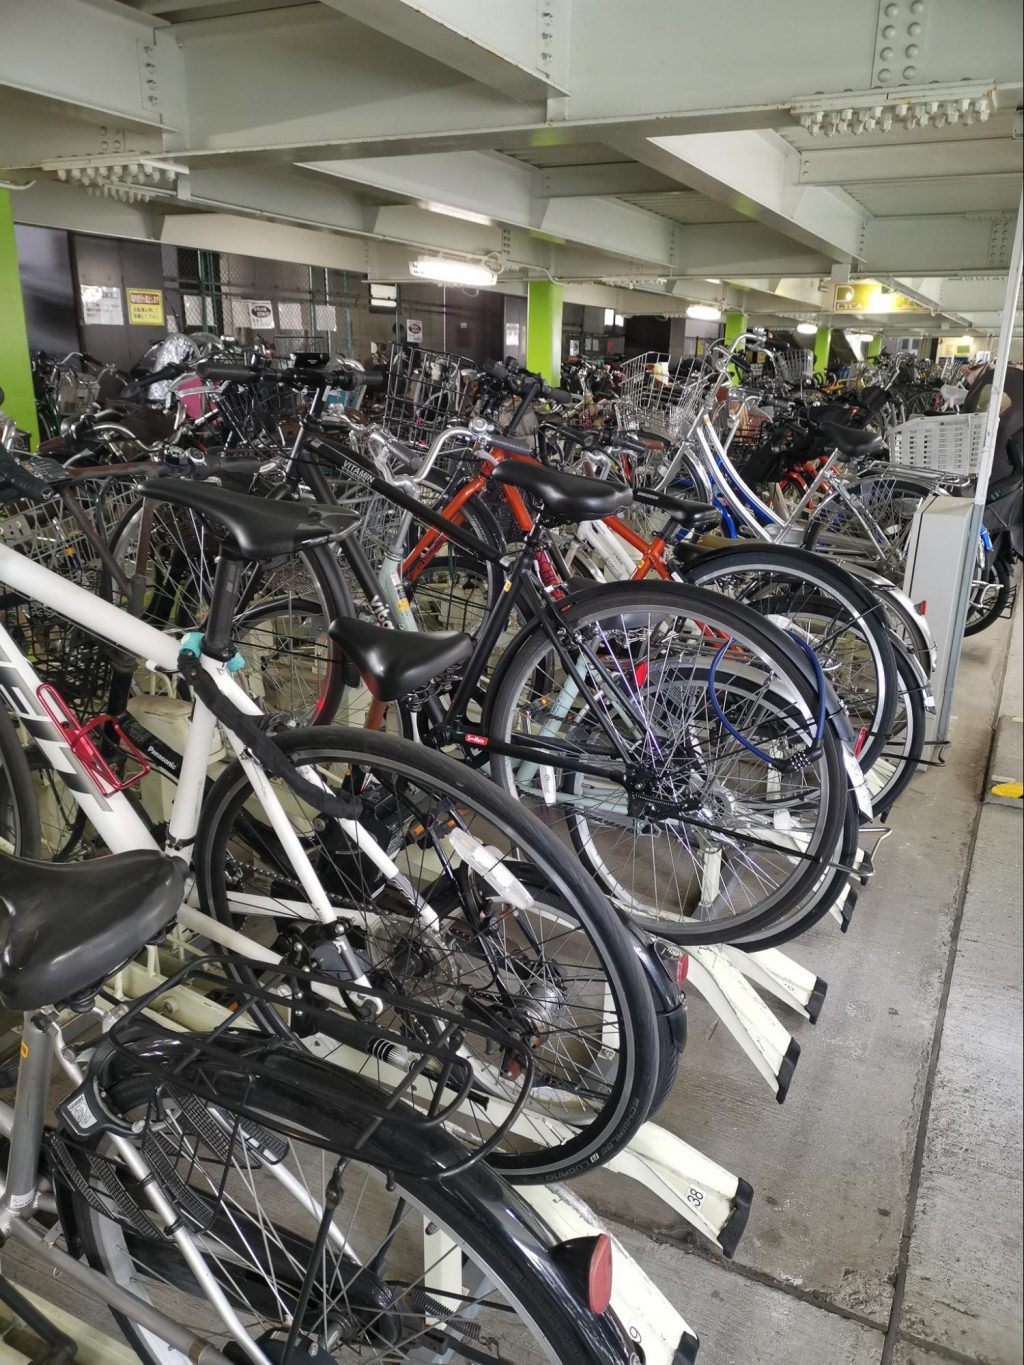 Trying to find my Docomo bike in an ocean of bicycles